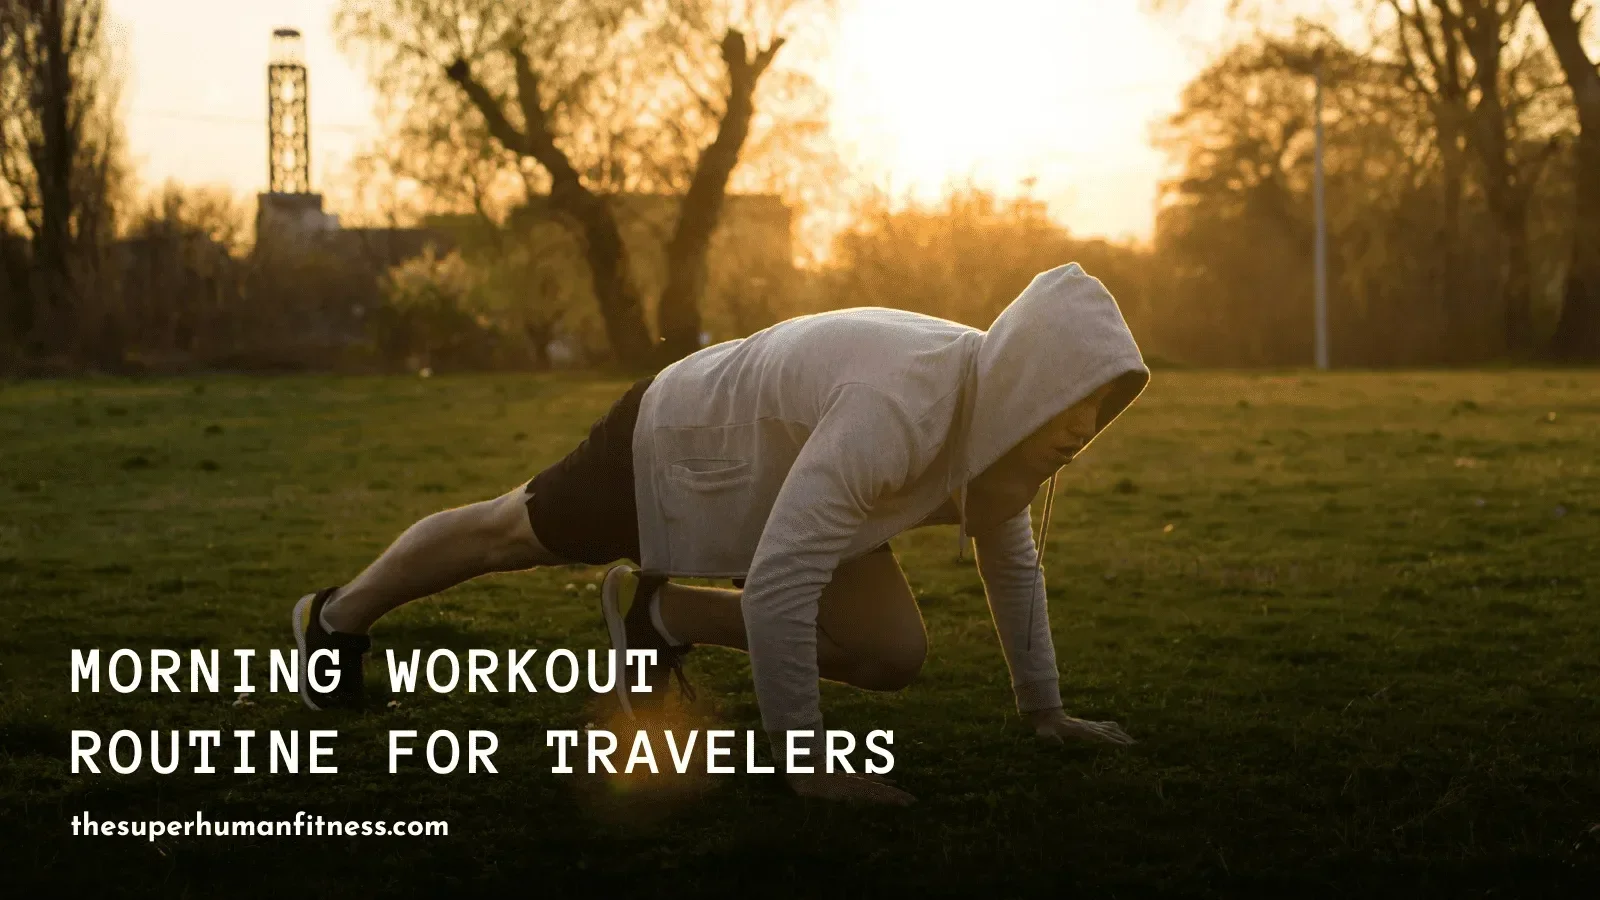 Morning Workout Routine for travelers